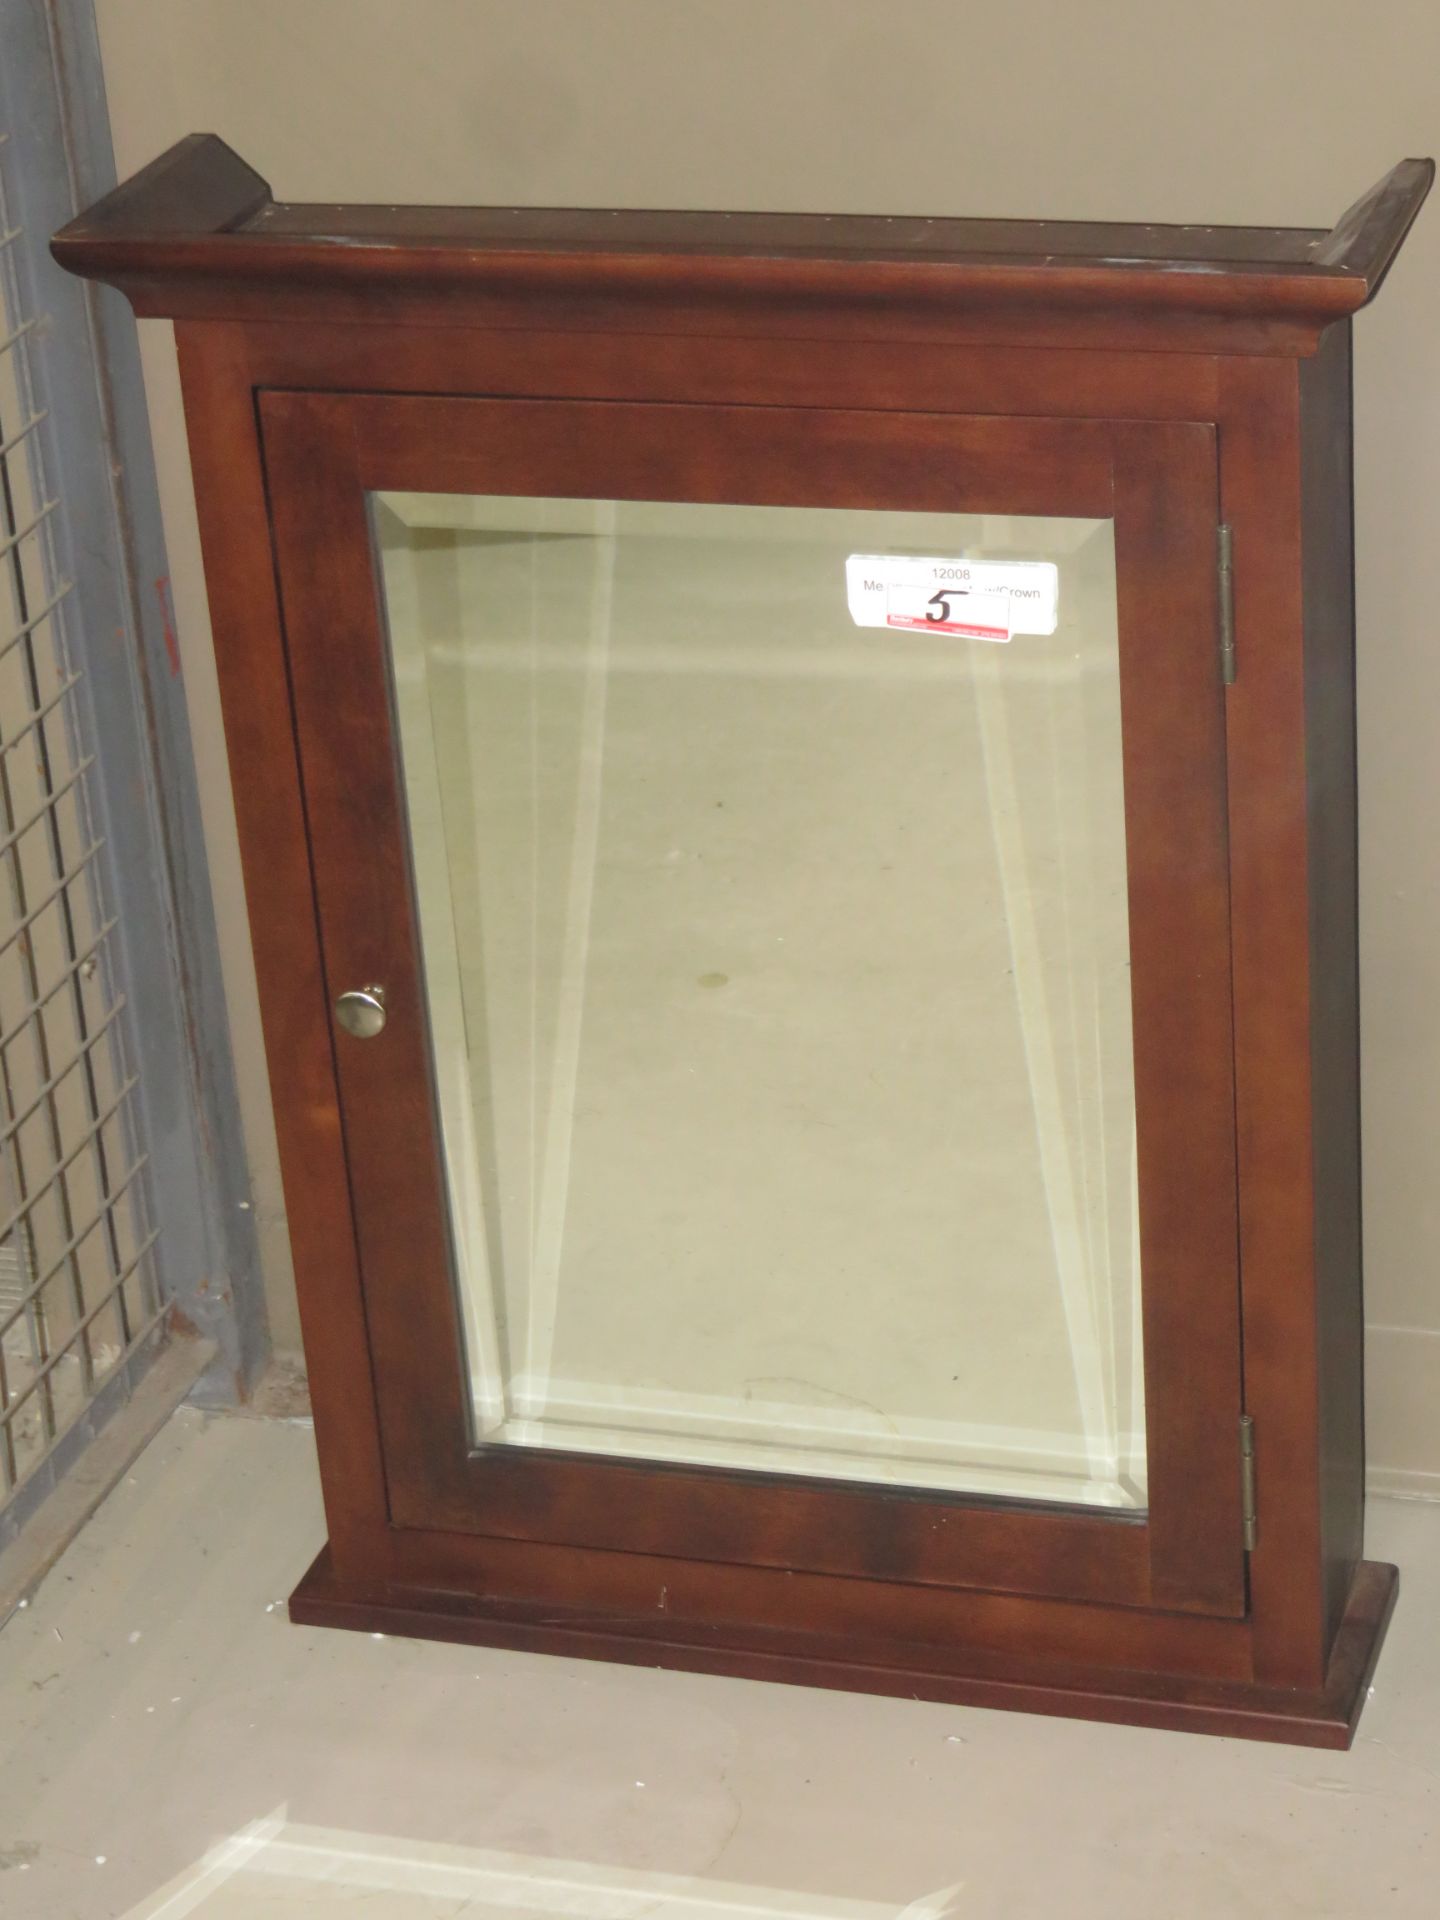 ROASTED CHESTNUT WOOD STAIN 25" X 32" MEDICINE CABINET W/ CROWN